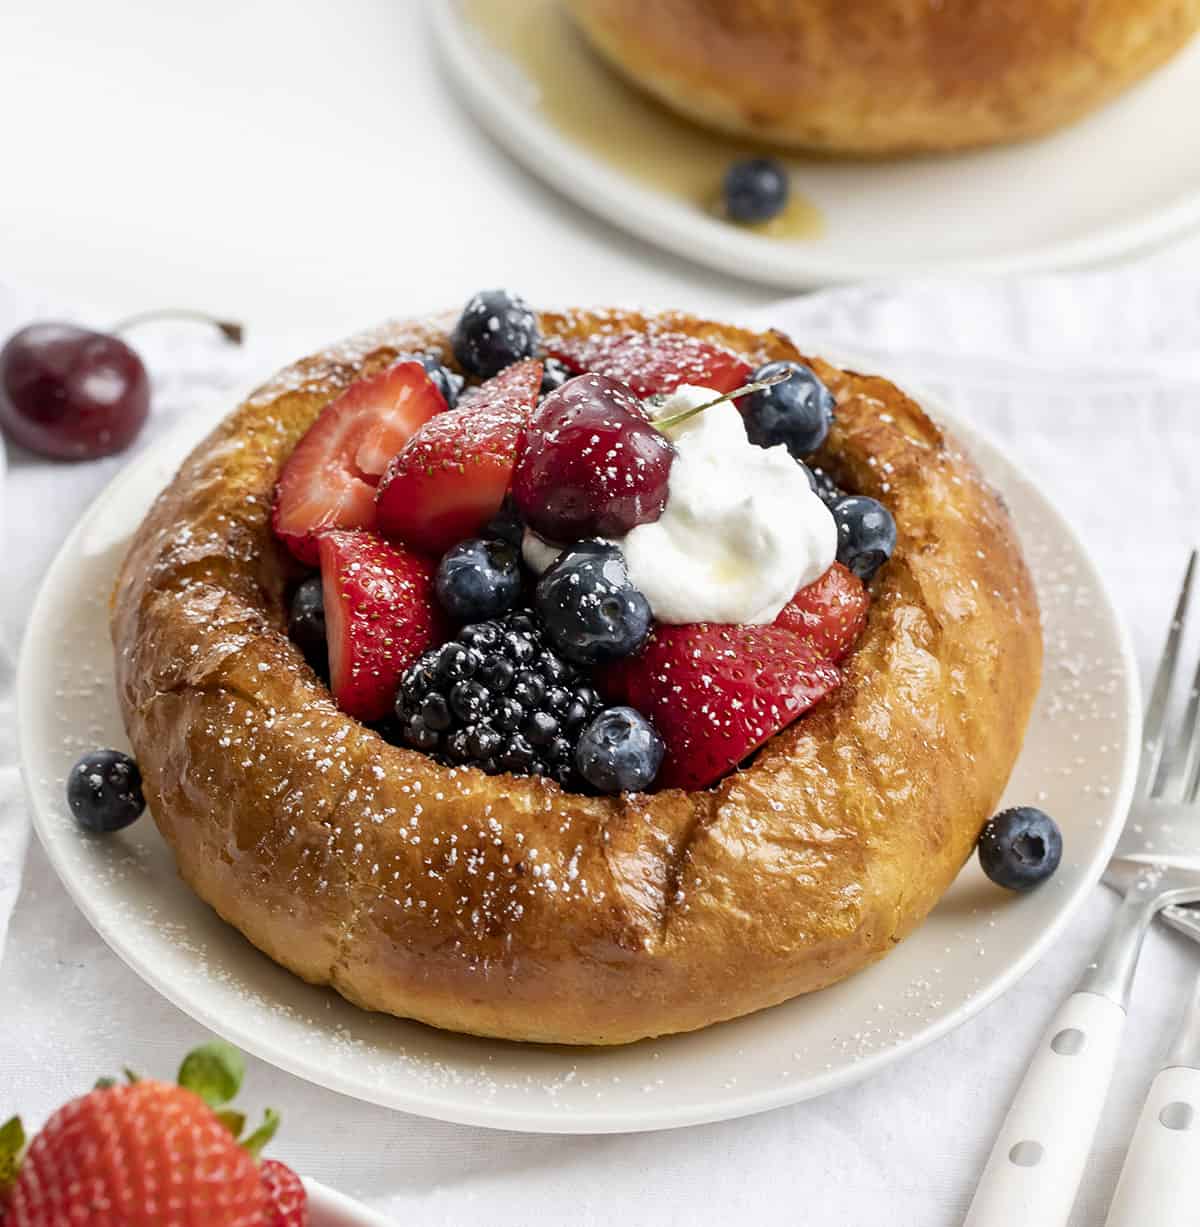 French Toast Bread Bowl on a Plate Filled with Fruit and Sprinkled with Confectioners Sugar. reakfast, French Toast, French Toast Bread Bowl, Fresh Fruit French Toast Bread Bowl, How to Make a Bread Bowl into French Toast, What Bread for French Toast, Fruit Filled French Toast, Fruit Breakfast, Breakfast Recipes, Decadent Breakfast, Brunch Breakfast Ideas, i am baker, iambaker.